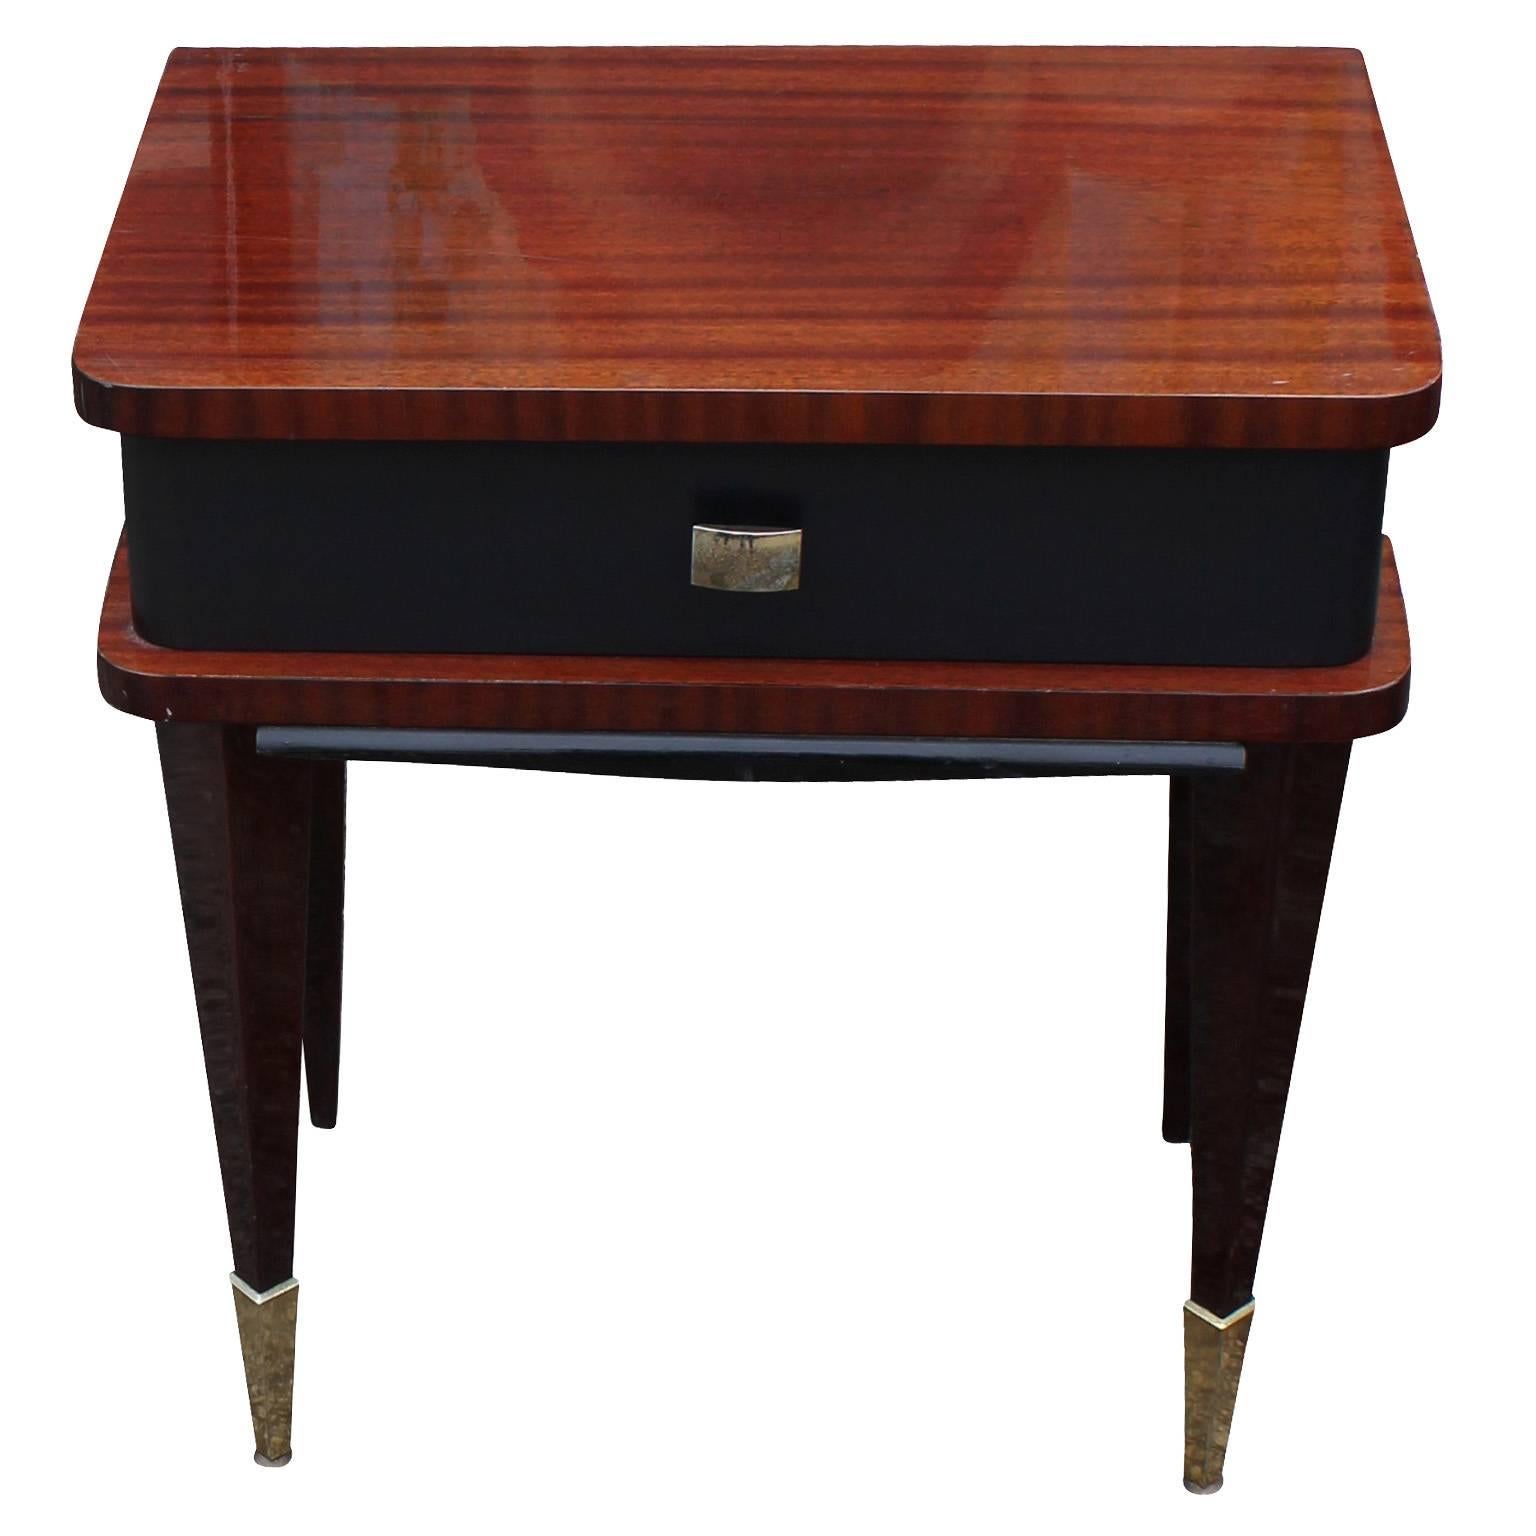 Excellent pair of French nightstands or side tables. Nightstands have excellent graining with a super glossy French polish. Drawer fronts nicely contrast the piece finished in a matte black. Tapered legs are finished in brass caps.